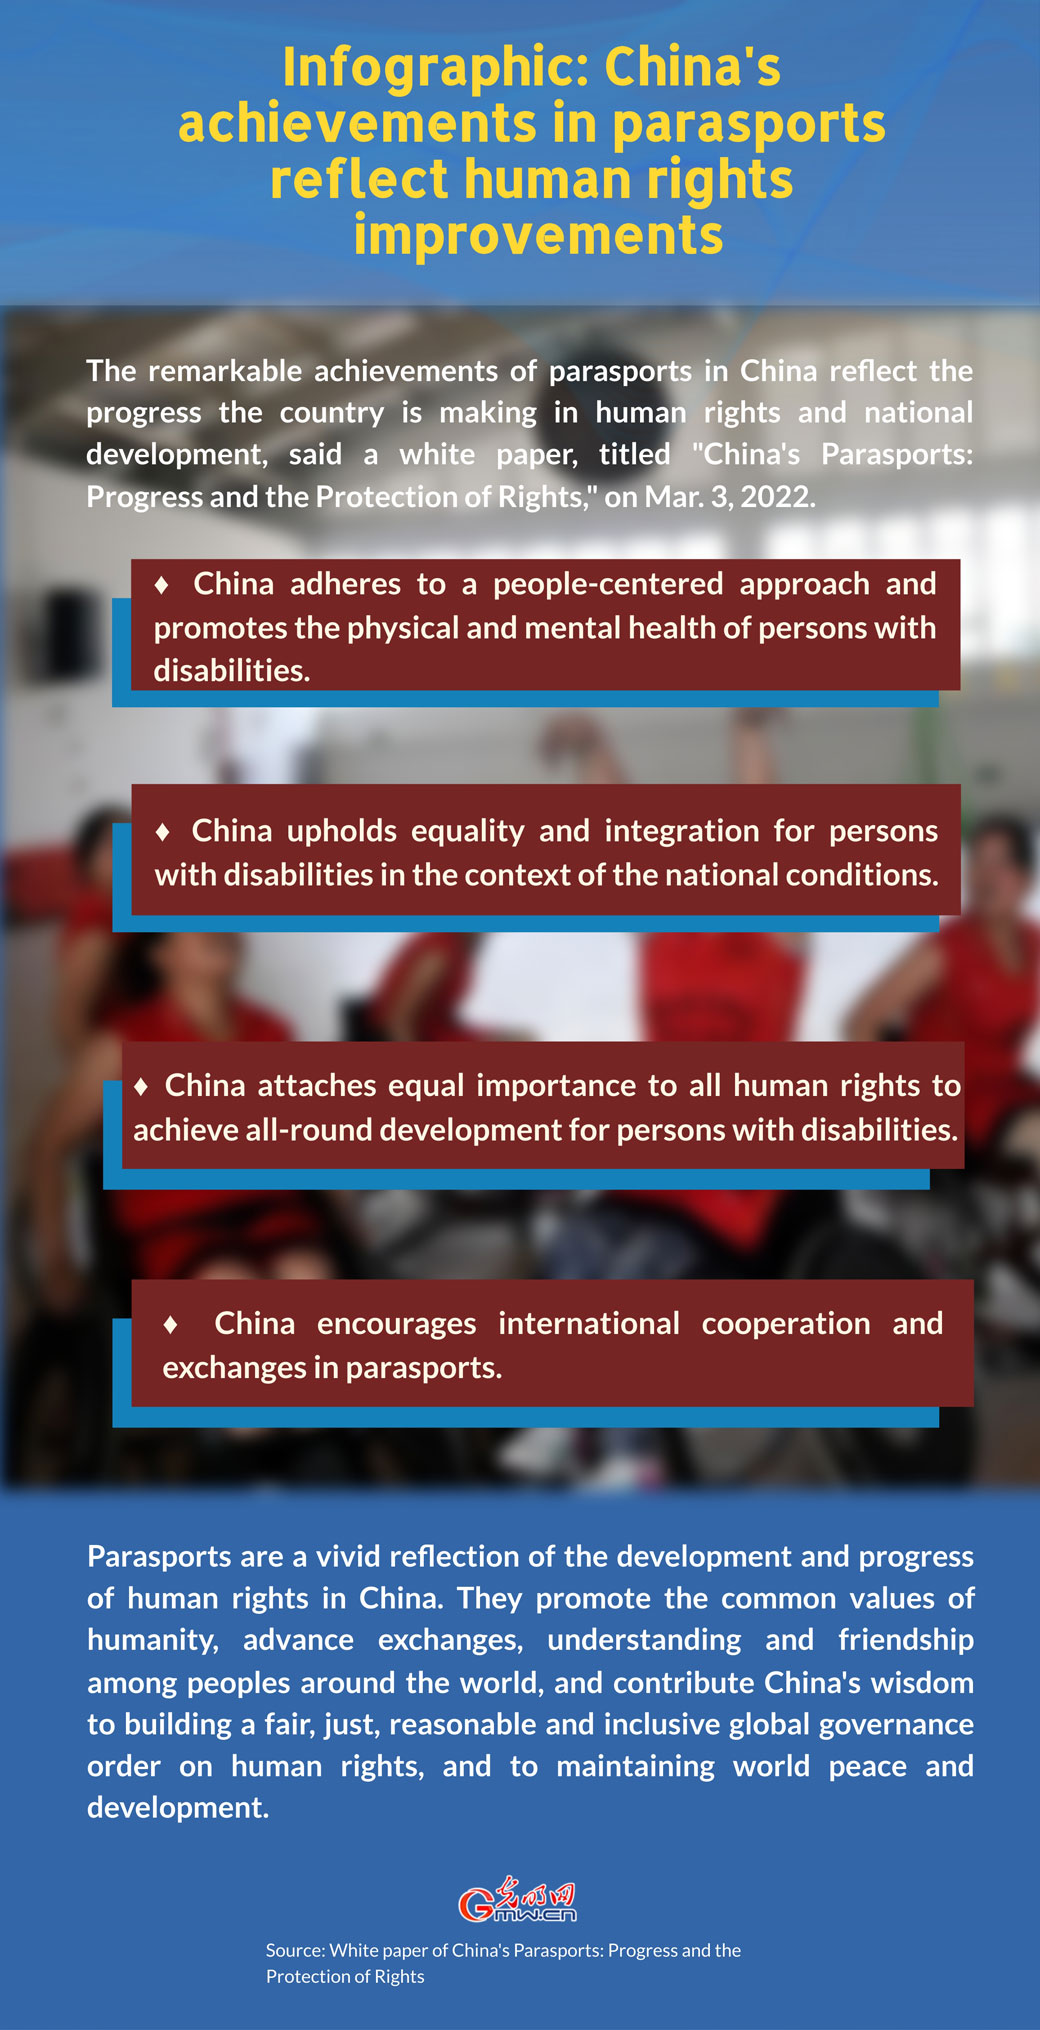 Infographic: China's achievements in parasports reflect human rights improvements